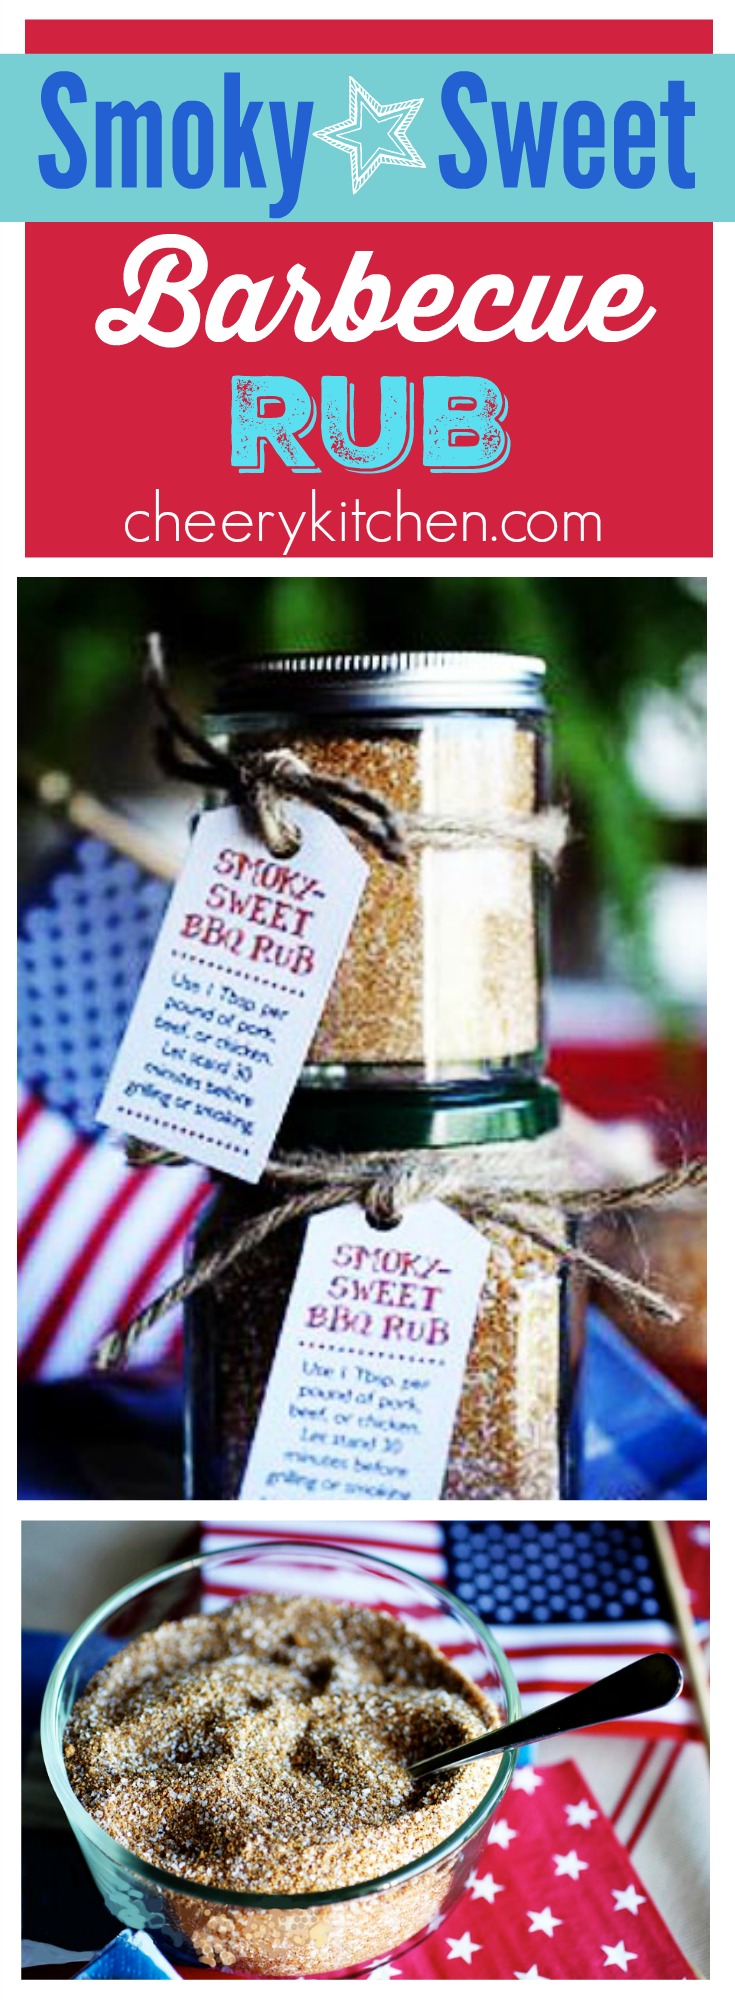 Try this Smoky Sweet Barbecue Rub on everything! You'll find it amazingly delicious on beef, pork, and chicken..it's all so good!